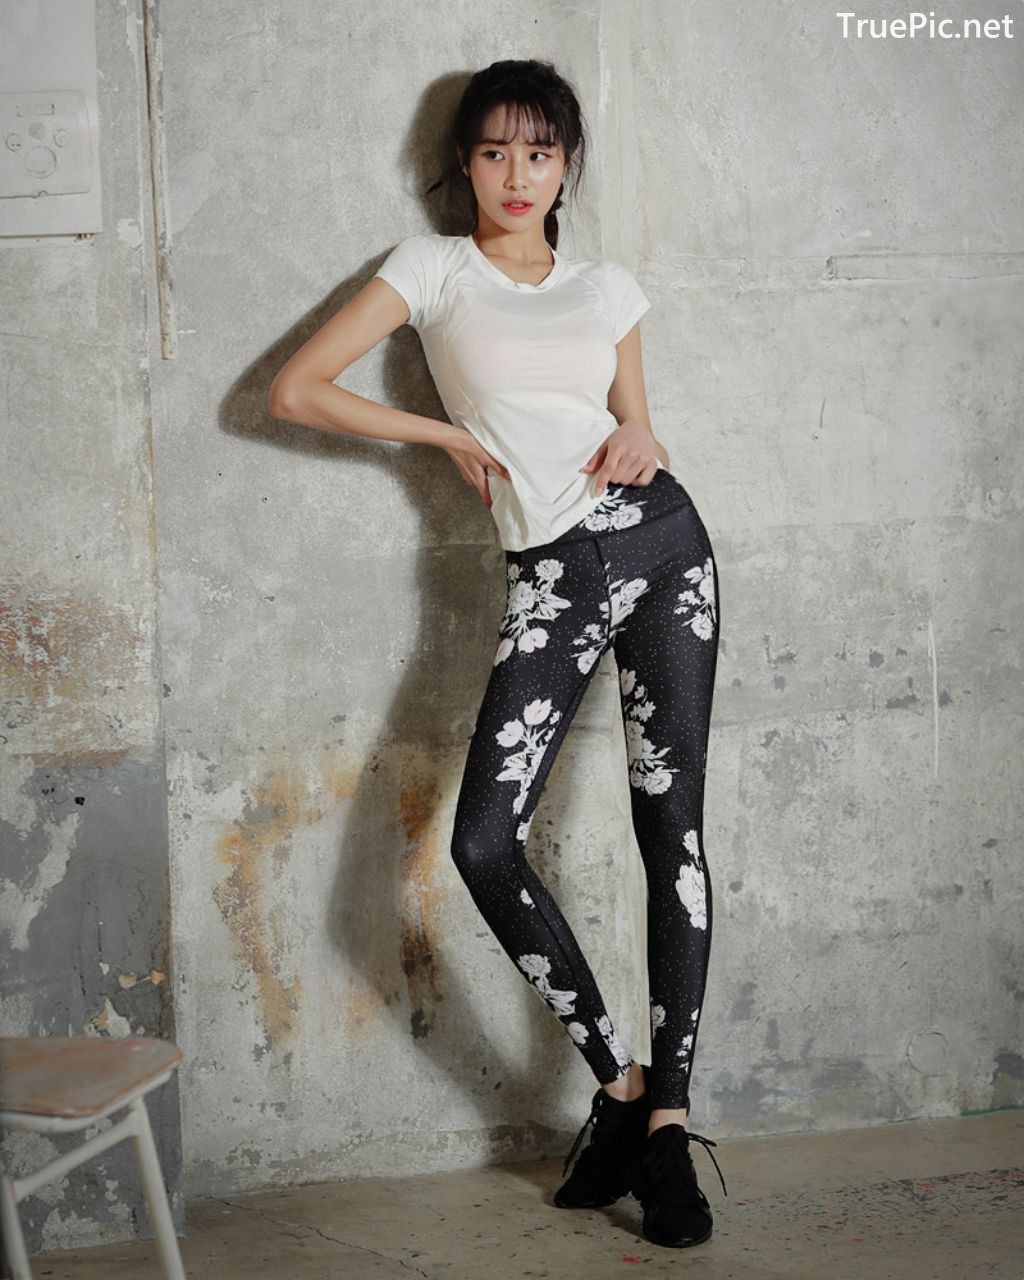 Image-Korean-Fashion-Model-Ju-Woo-Fitness-Set-Collection-TruePic.net- Picture-146